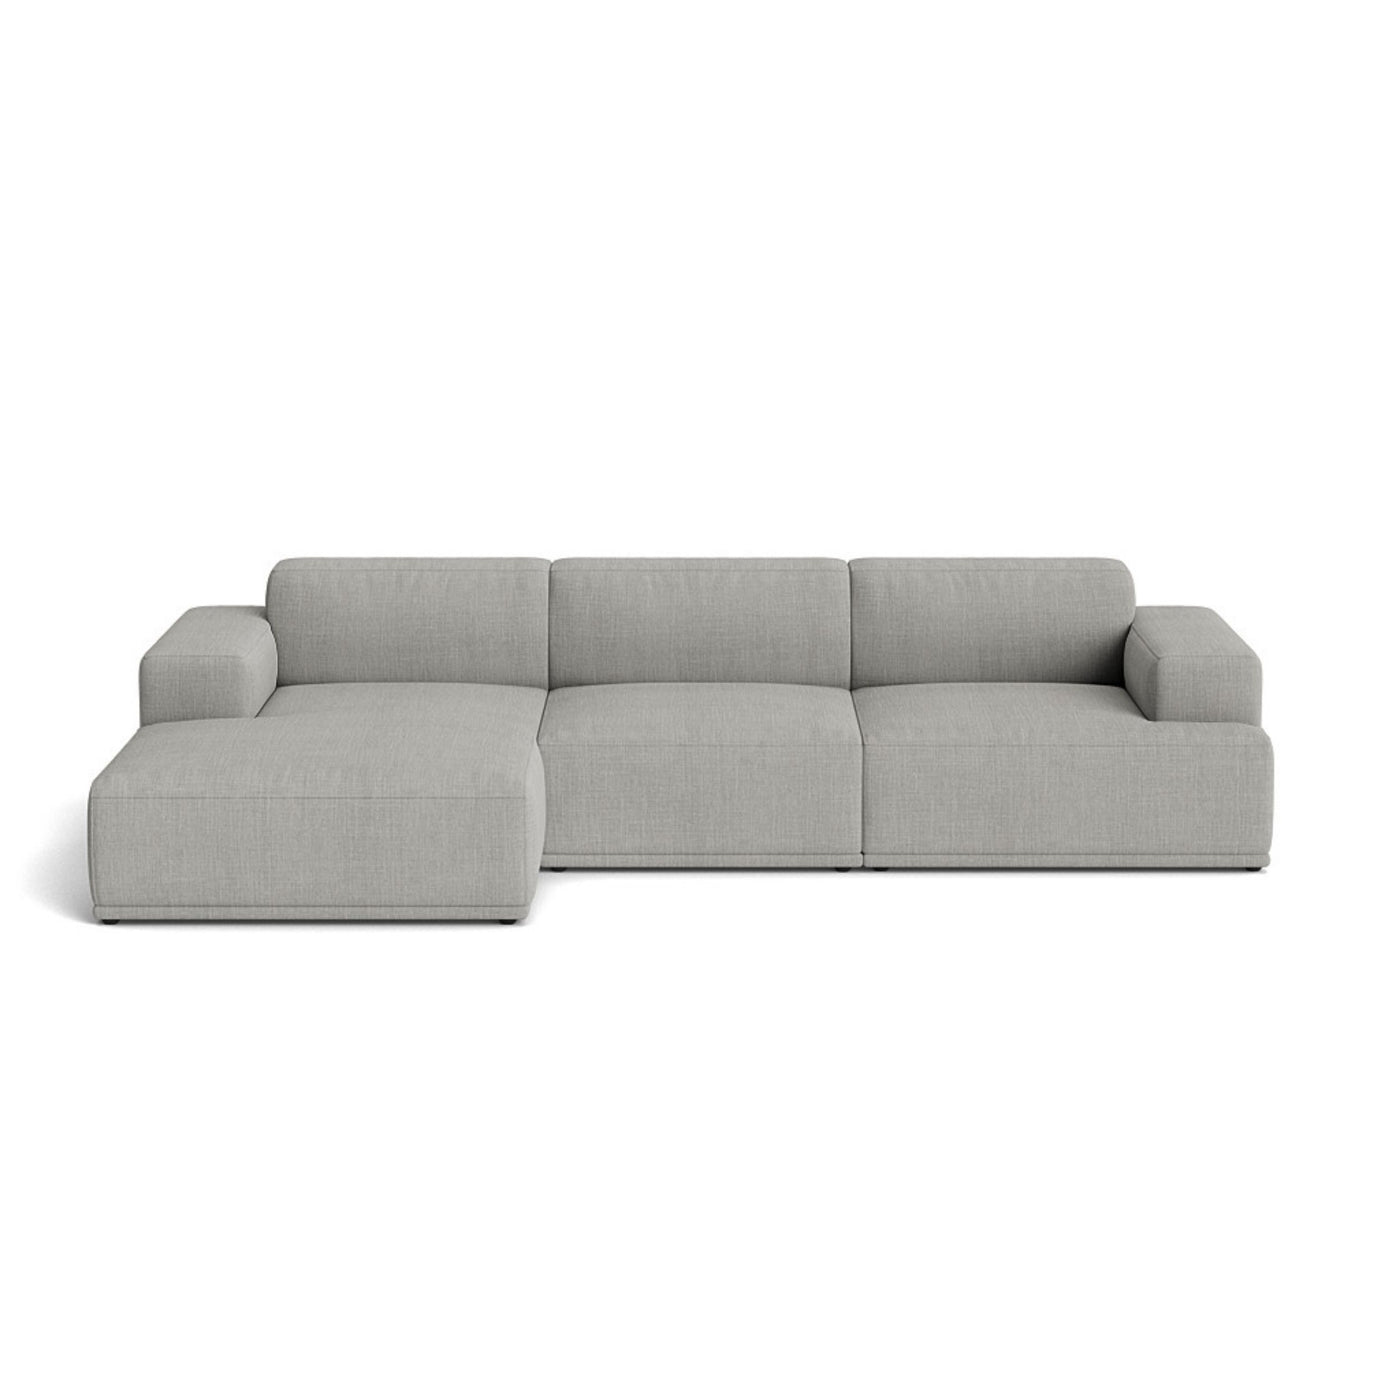 Muuto Connect Soft Modular 3 Seater Sofa, configuration 3. Made-to-order from someday designs. #colour_remix-133